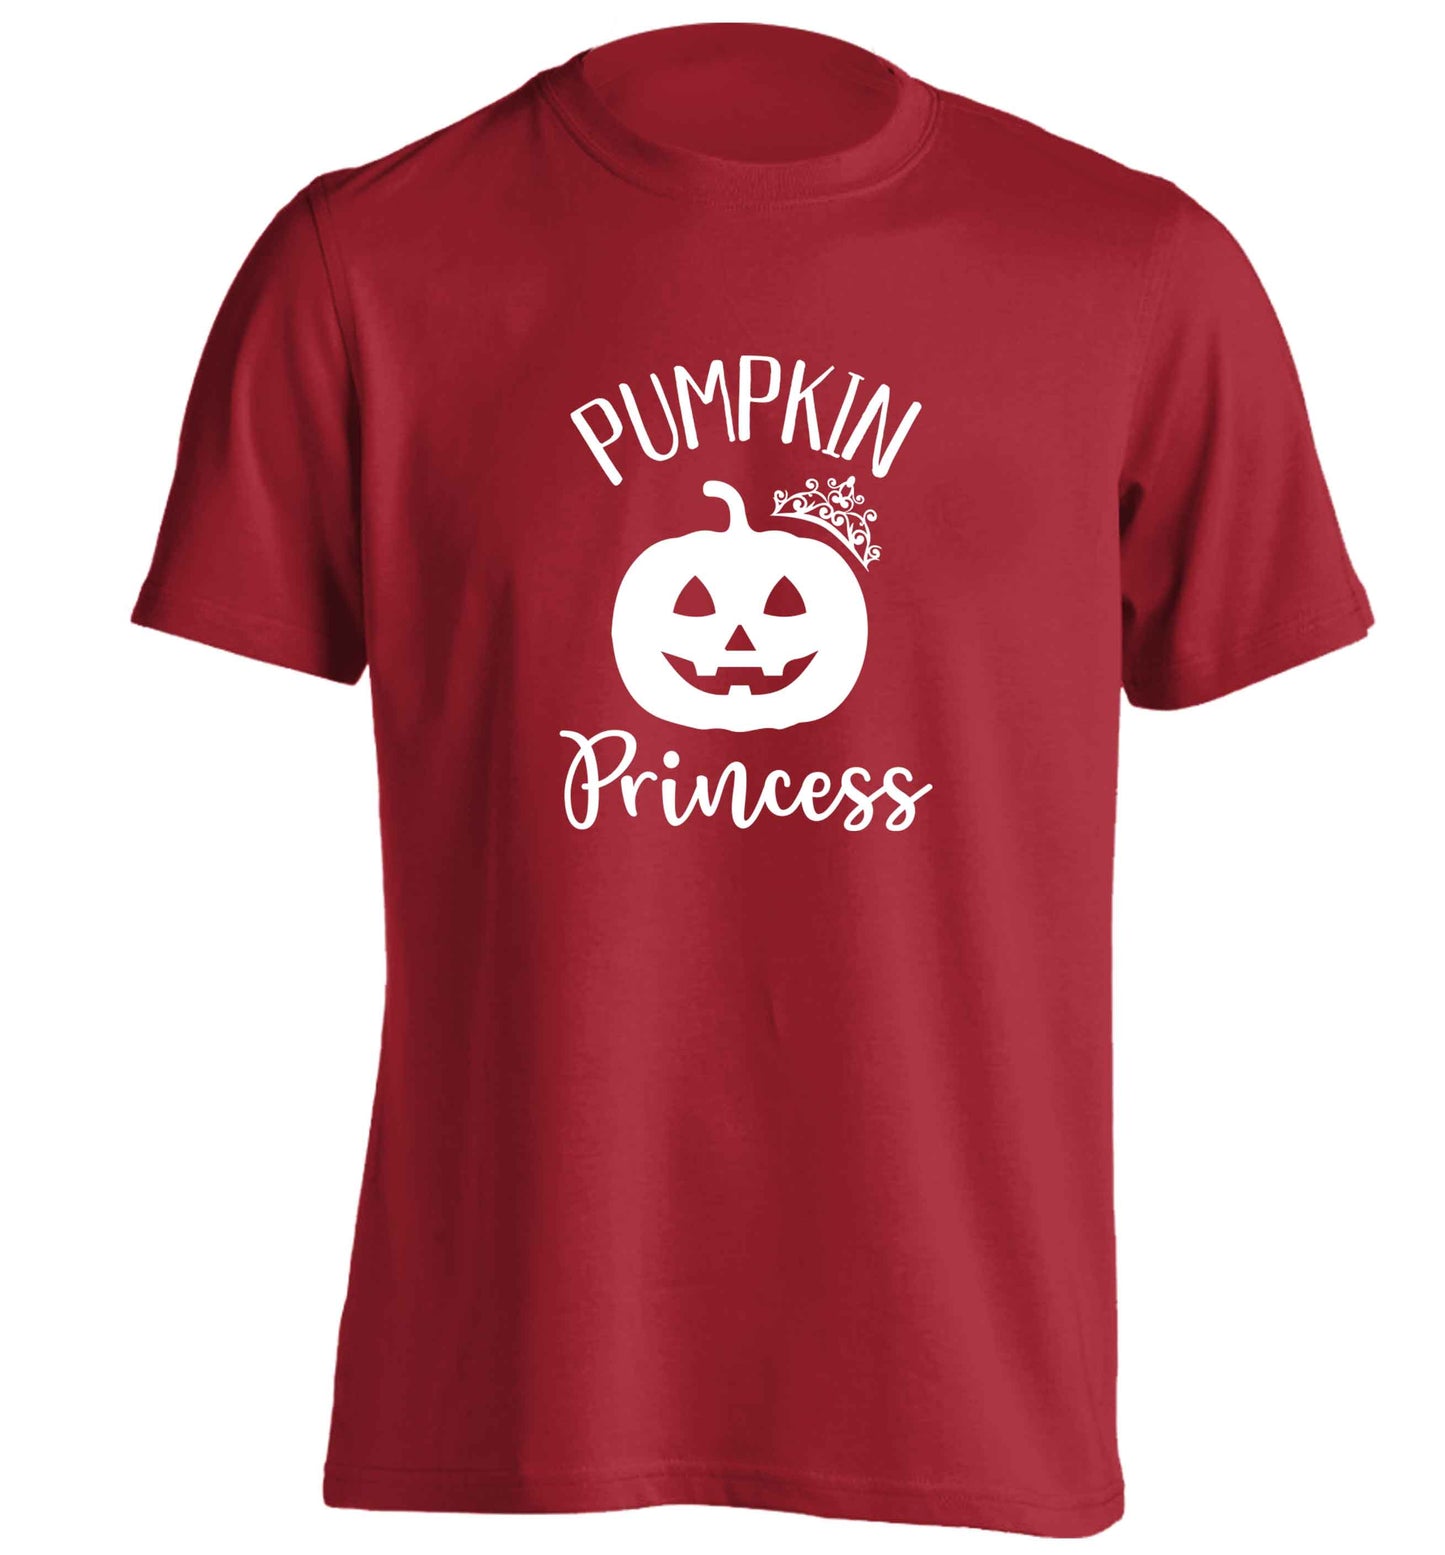 Happiness Pumpkin Spice adults unisex red Tshirt 2XL